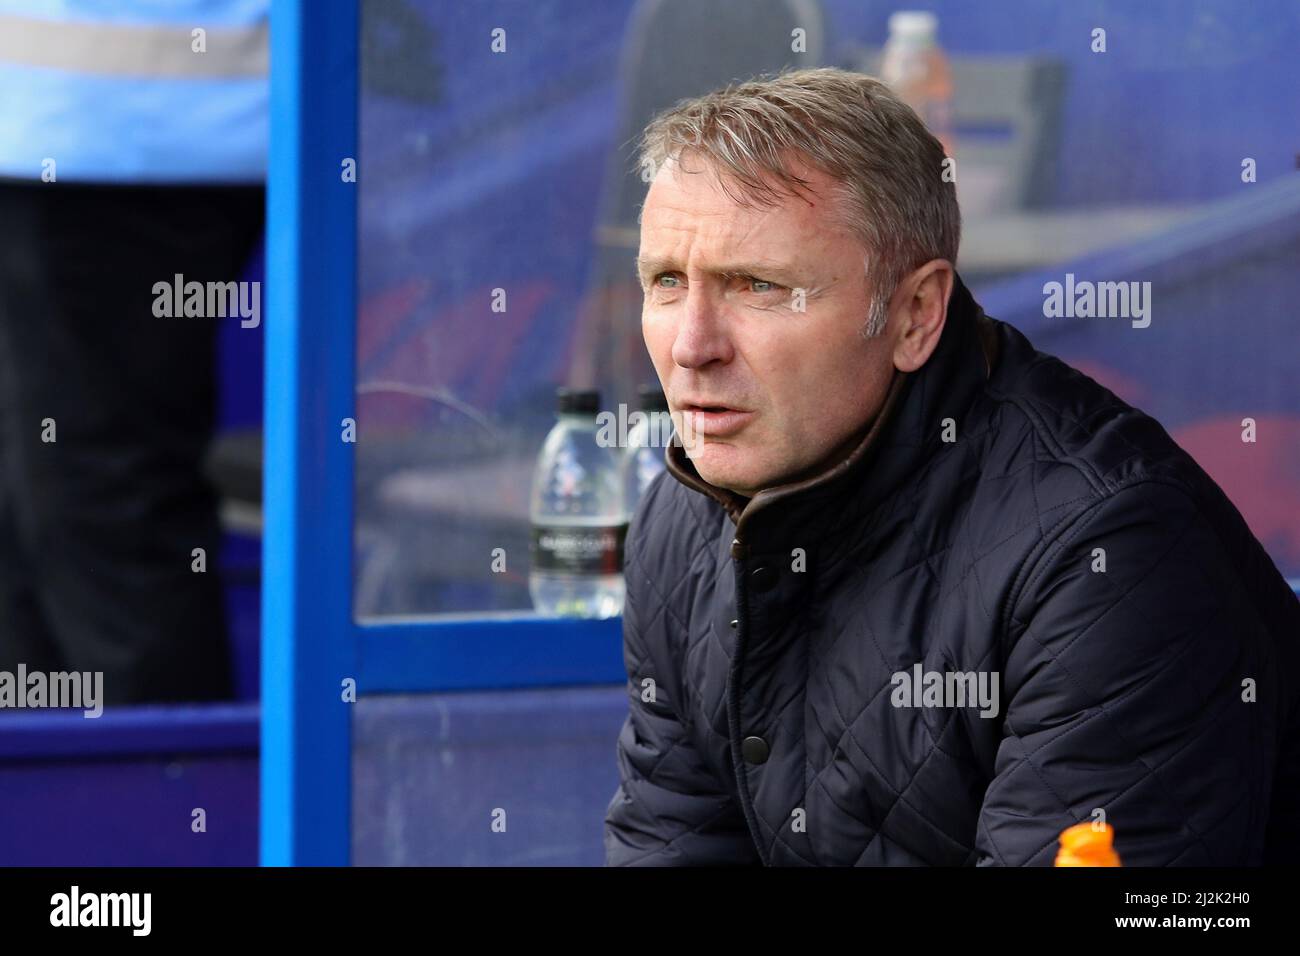 Birkenhead, UK. 02nd Apr, 2022. Carlisle United manager Paul Simpson during the Sky Bet League Two match between Tranmere Rovers and Carlisle United at Prenton Park on April 2nd 2022 in Birkenhead, England. (Photo by Tony Taylor/phcimages.com) Credit: PHC Images/Alamy Live News Stock Photo